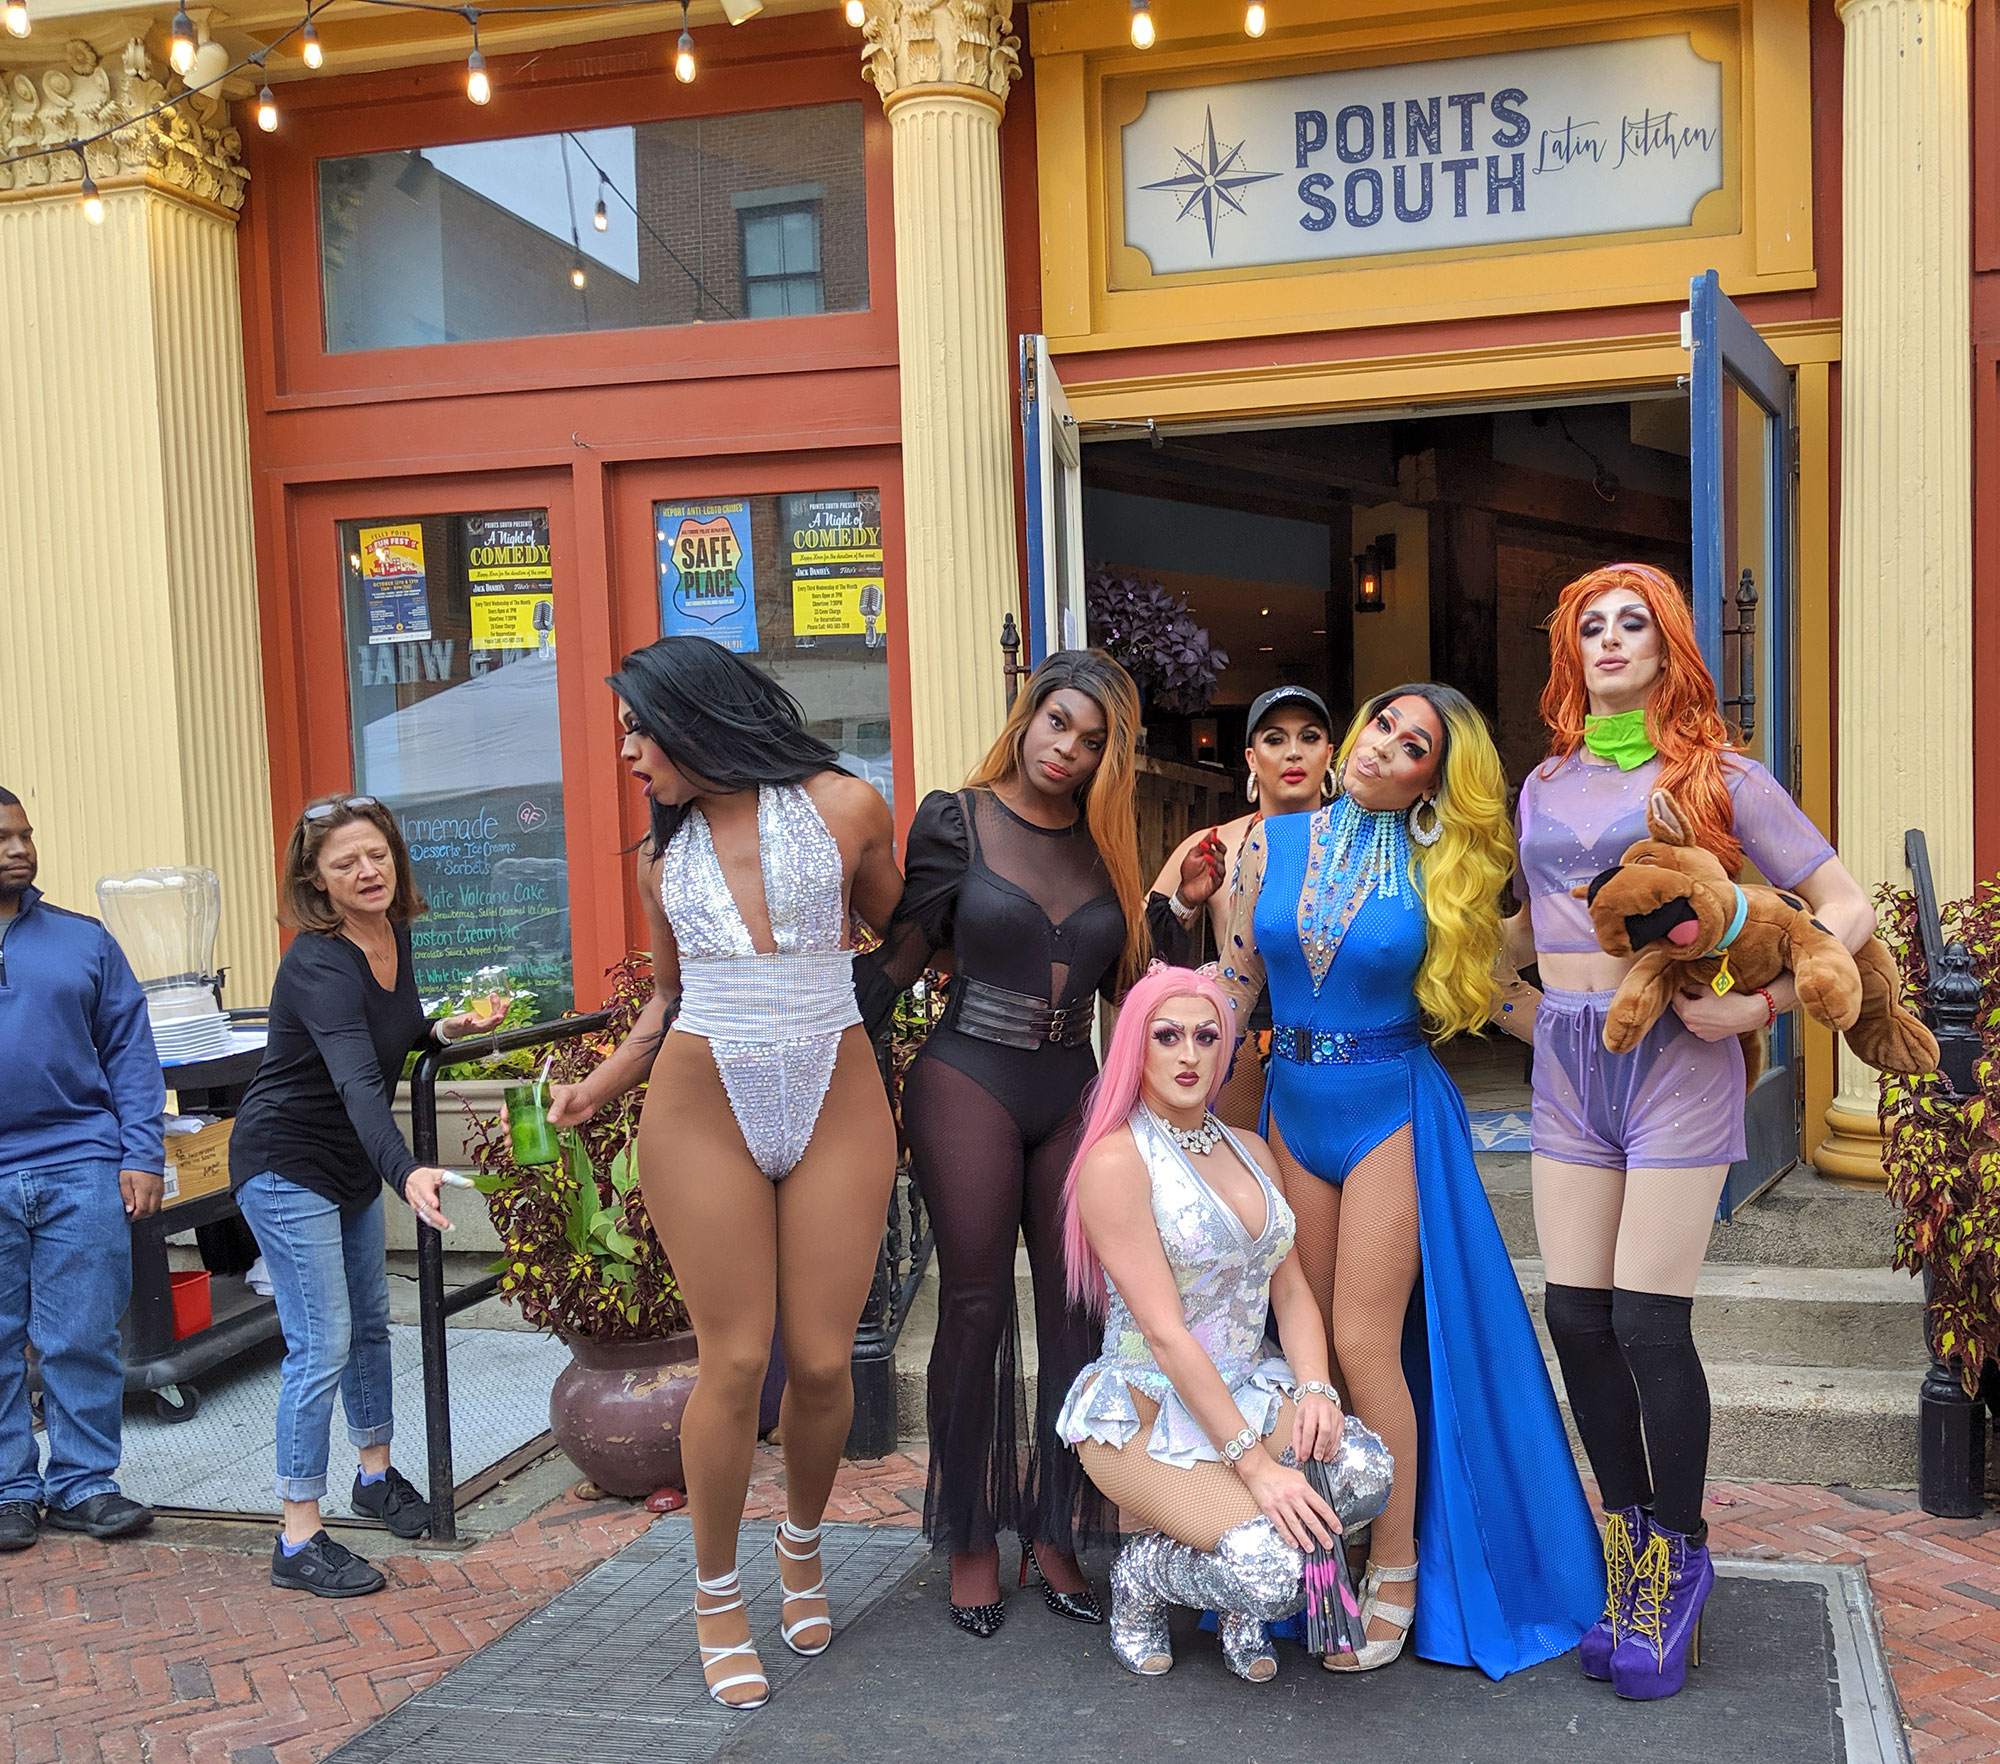 The drag brunch cast at Points South Latin Kitchen in Baltimore.